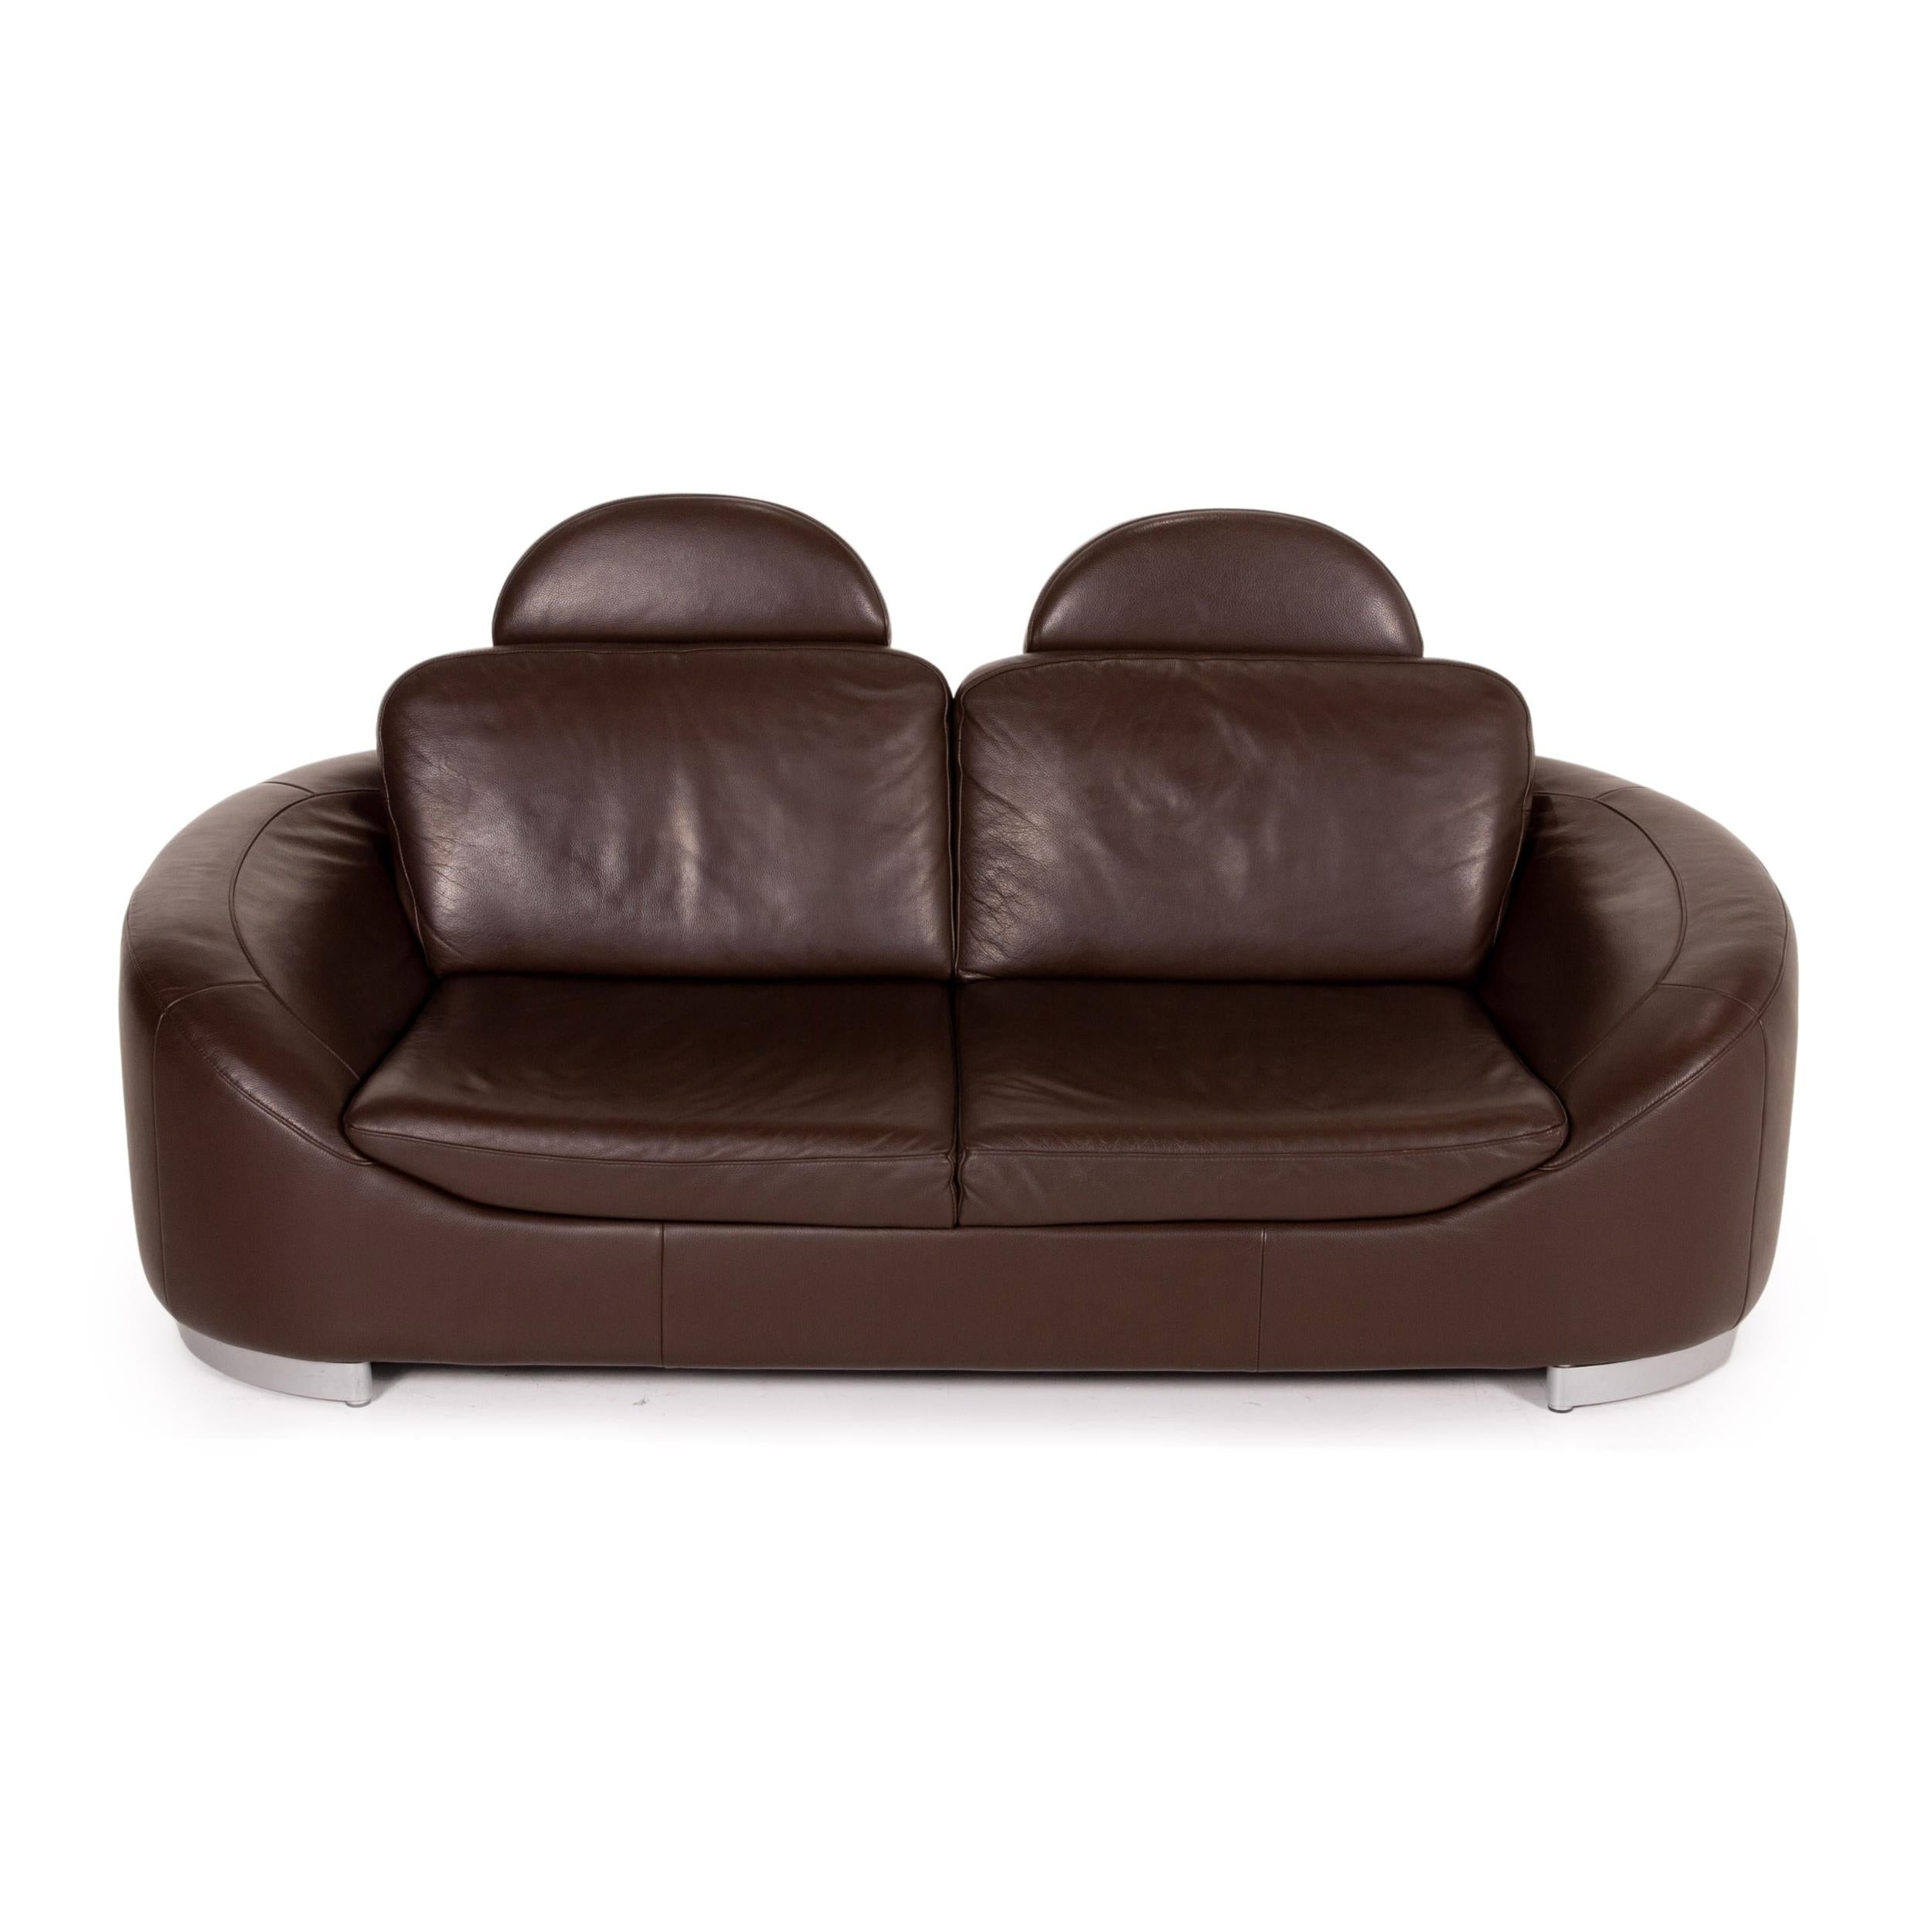 Ewald Schillig Leather Sofa Set Brown Dark Brown 2x Two-Seater For Sale 9